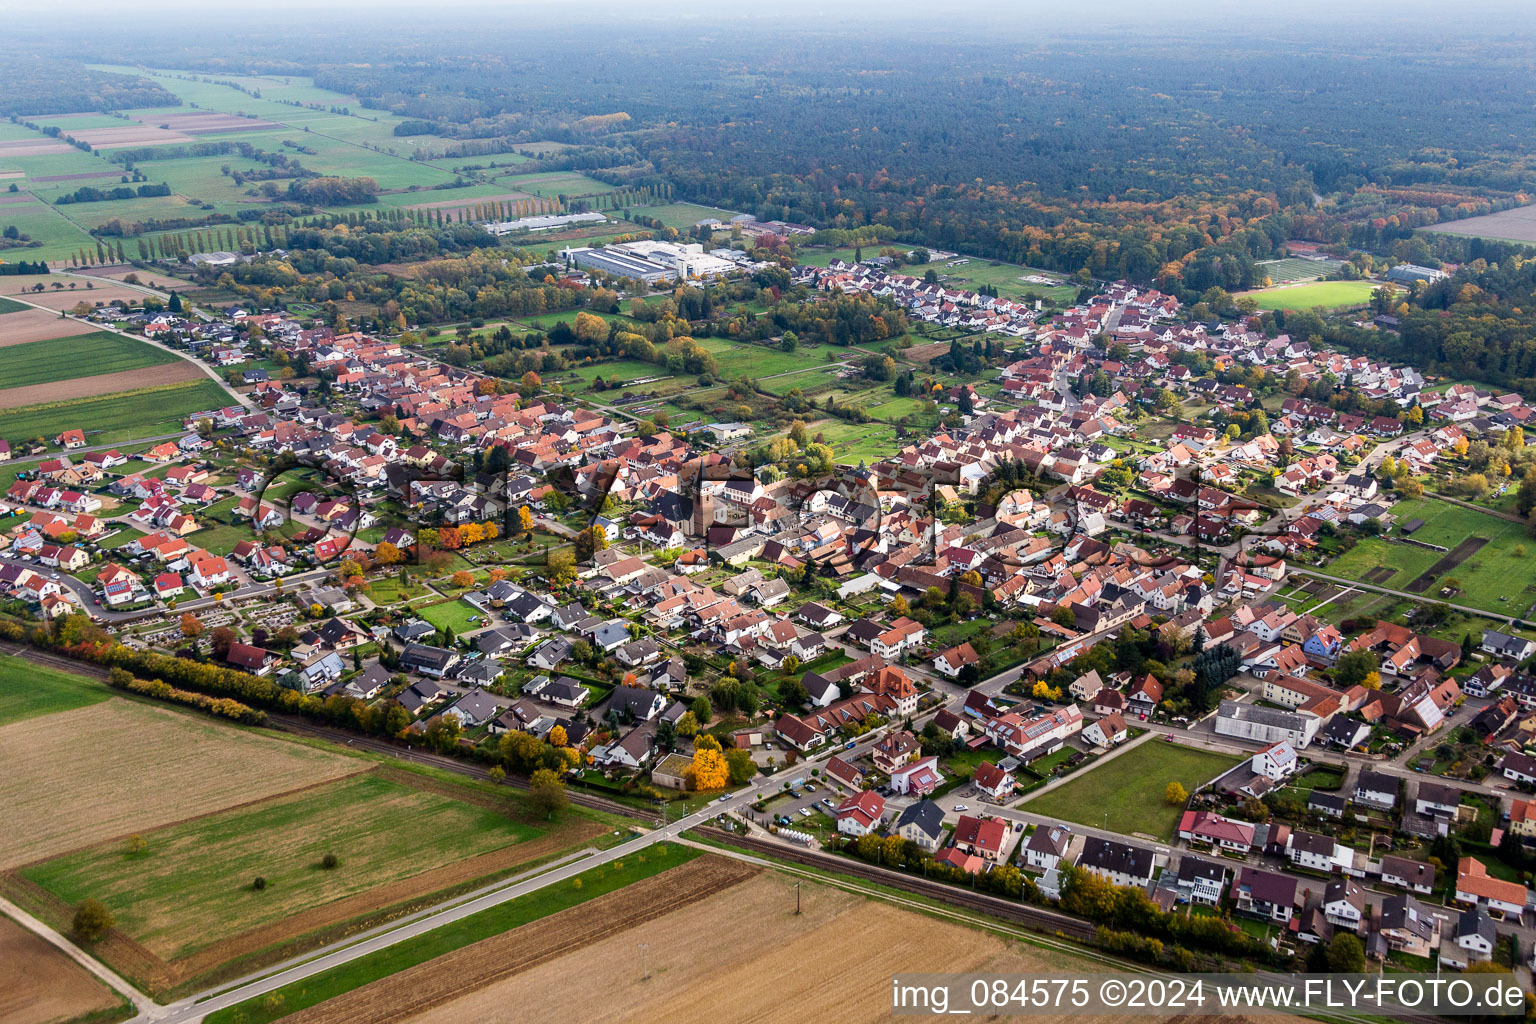 Town View of the streets and houses of the residential areas in the district Schaidt in Woerth am Rhein in the state Rhineland-Palatinate, Germany